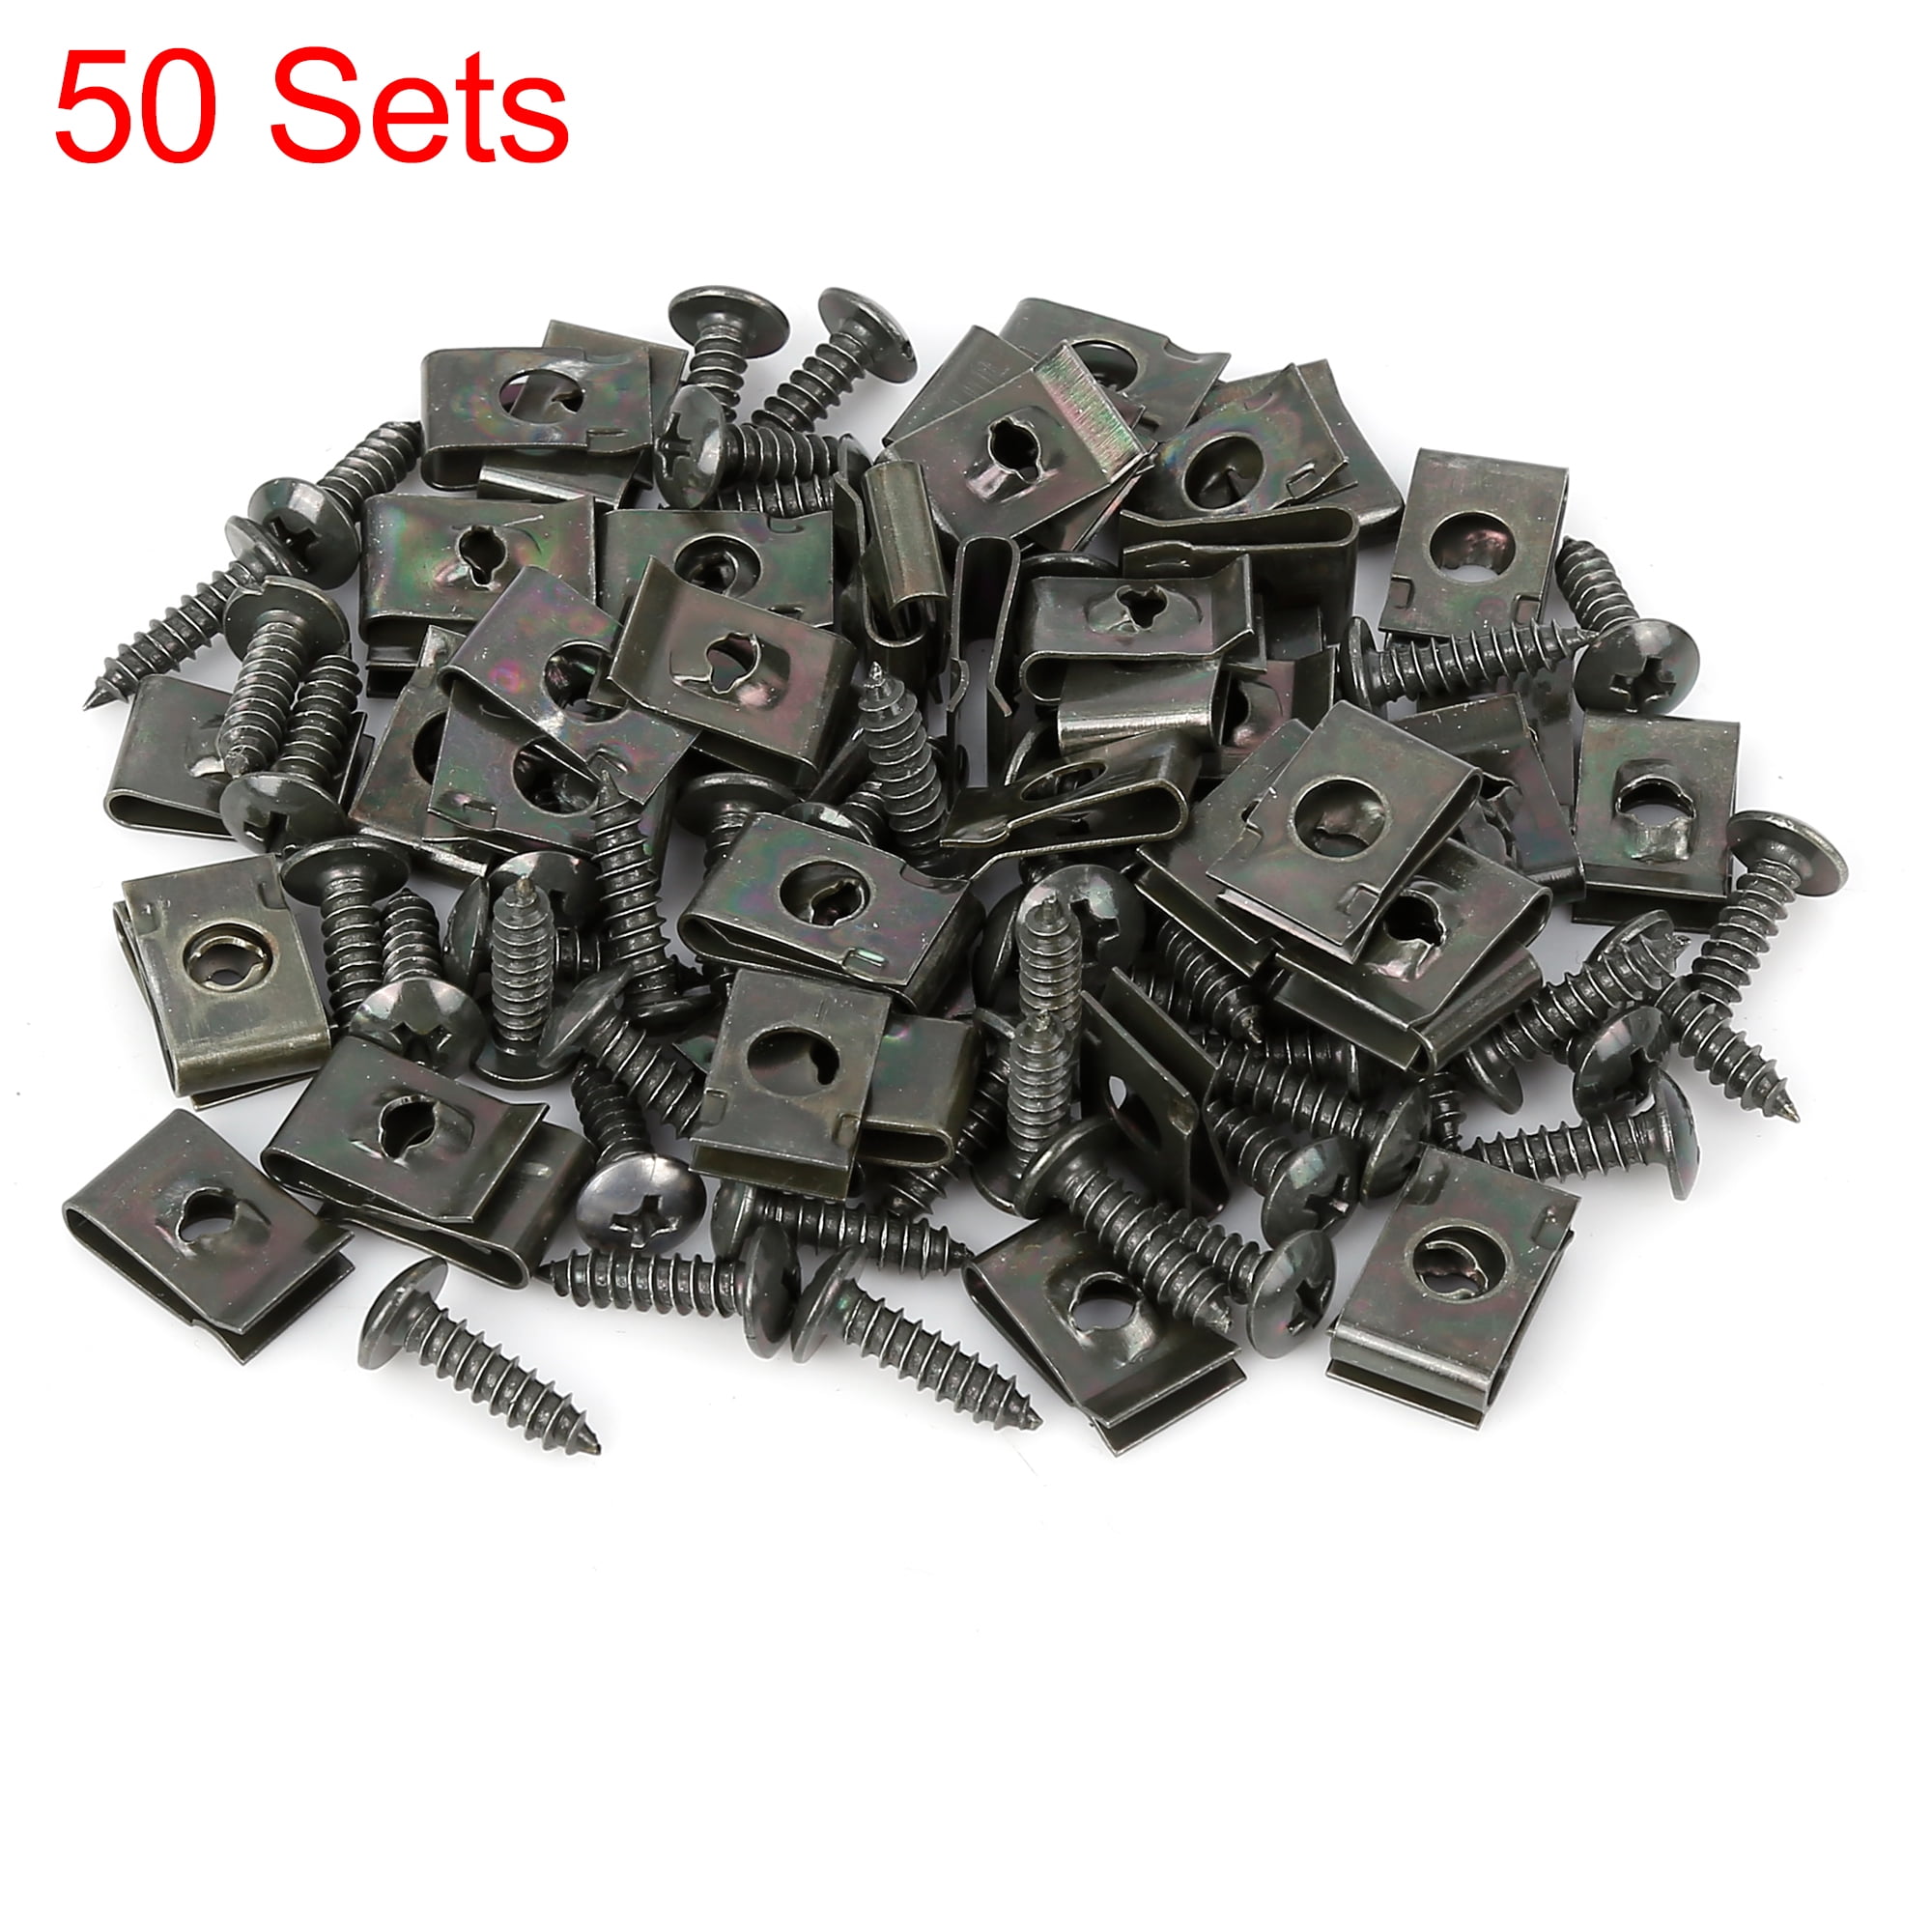 300pcs U Nut Clips,Clip Nut and Screw Assortment Kit 4 Sizes Auto Car Clips  Fasteners with Screws Set in Store Case for Auto Bumper Dash,Interior Trim  